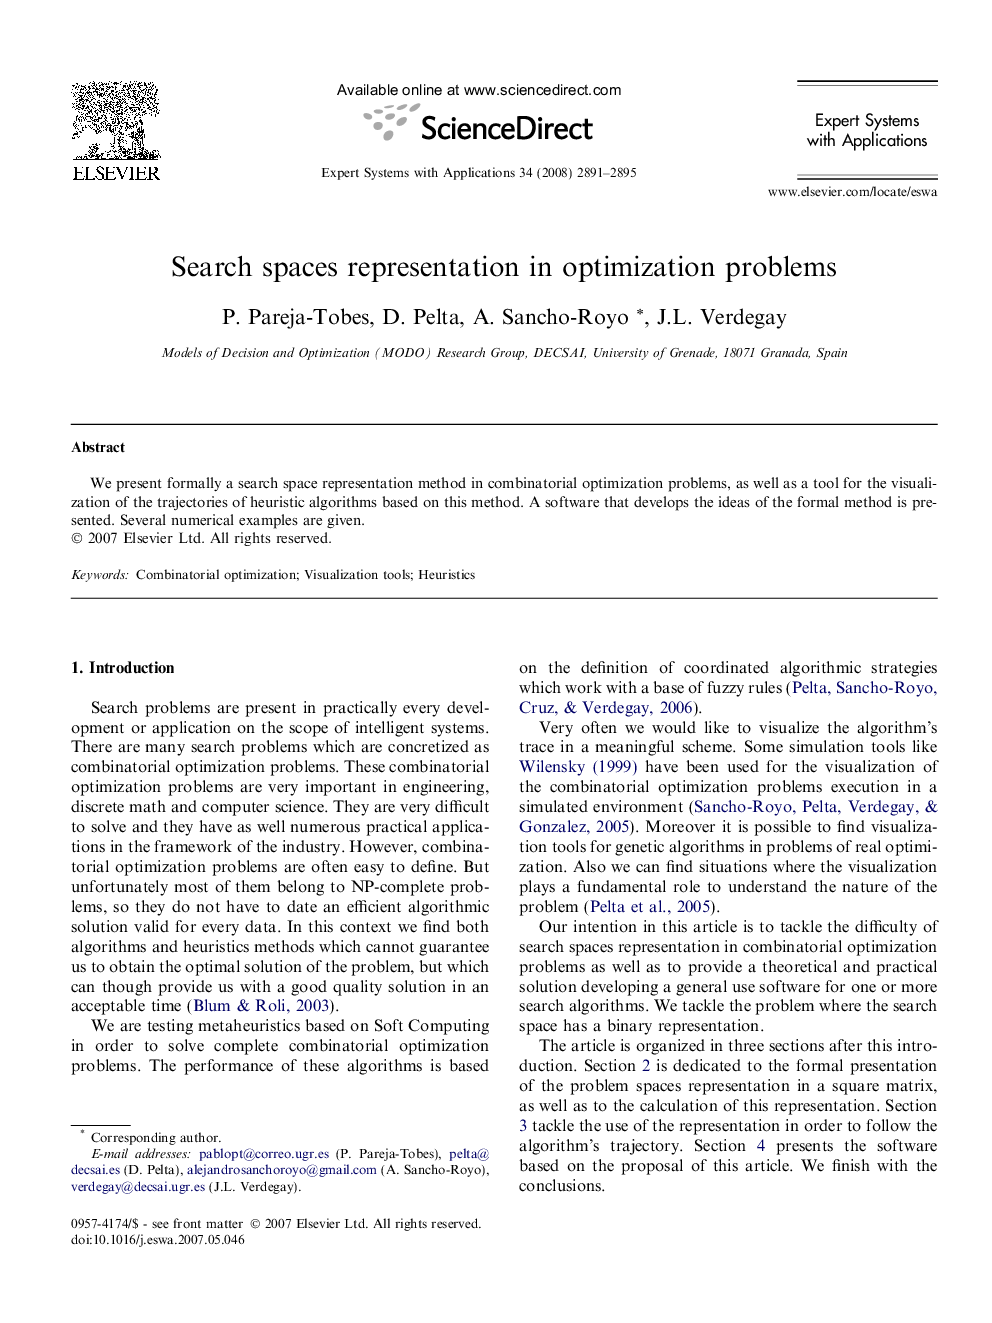 Search spaces representation in optimization problems